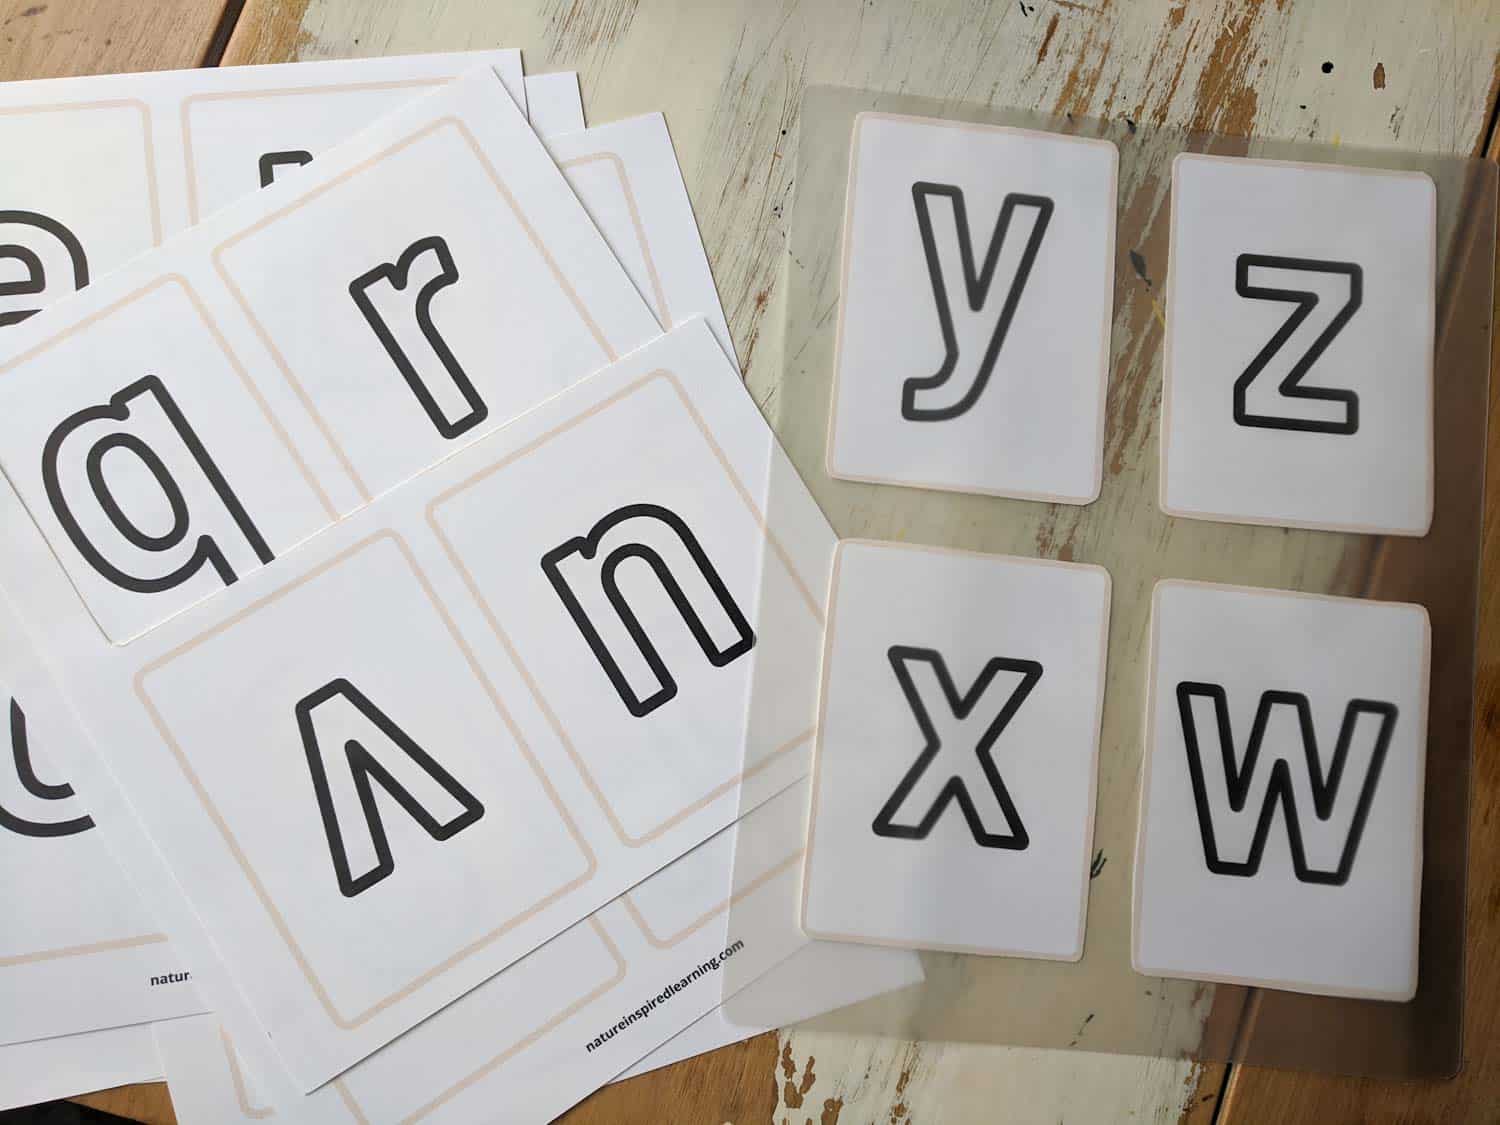 printed off flashcard set with lowercase letters in a pile on a wooden table to the right letters y, z, x, and w in a laminating sheet